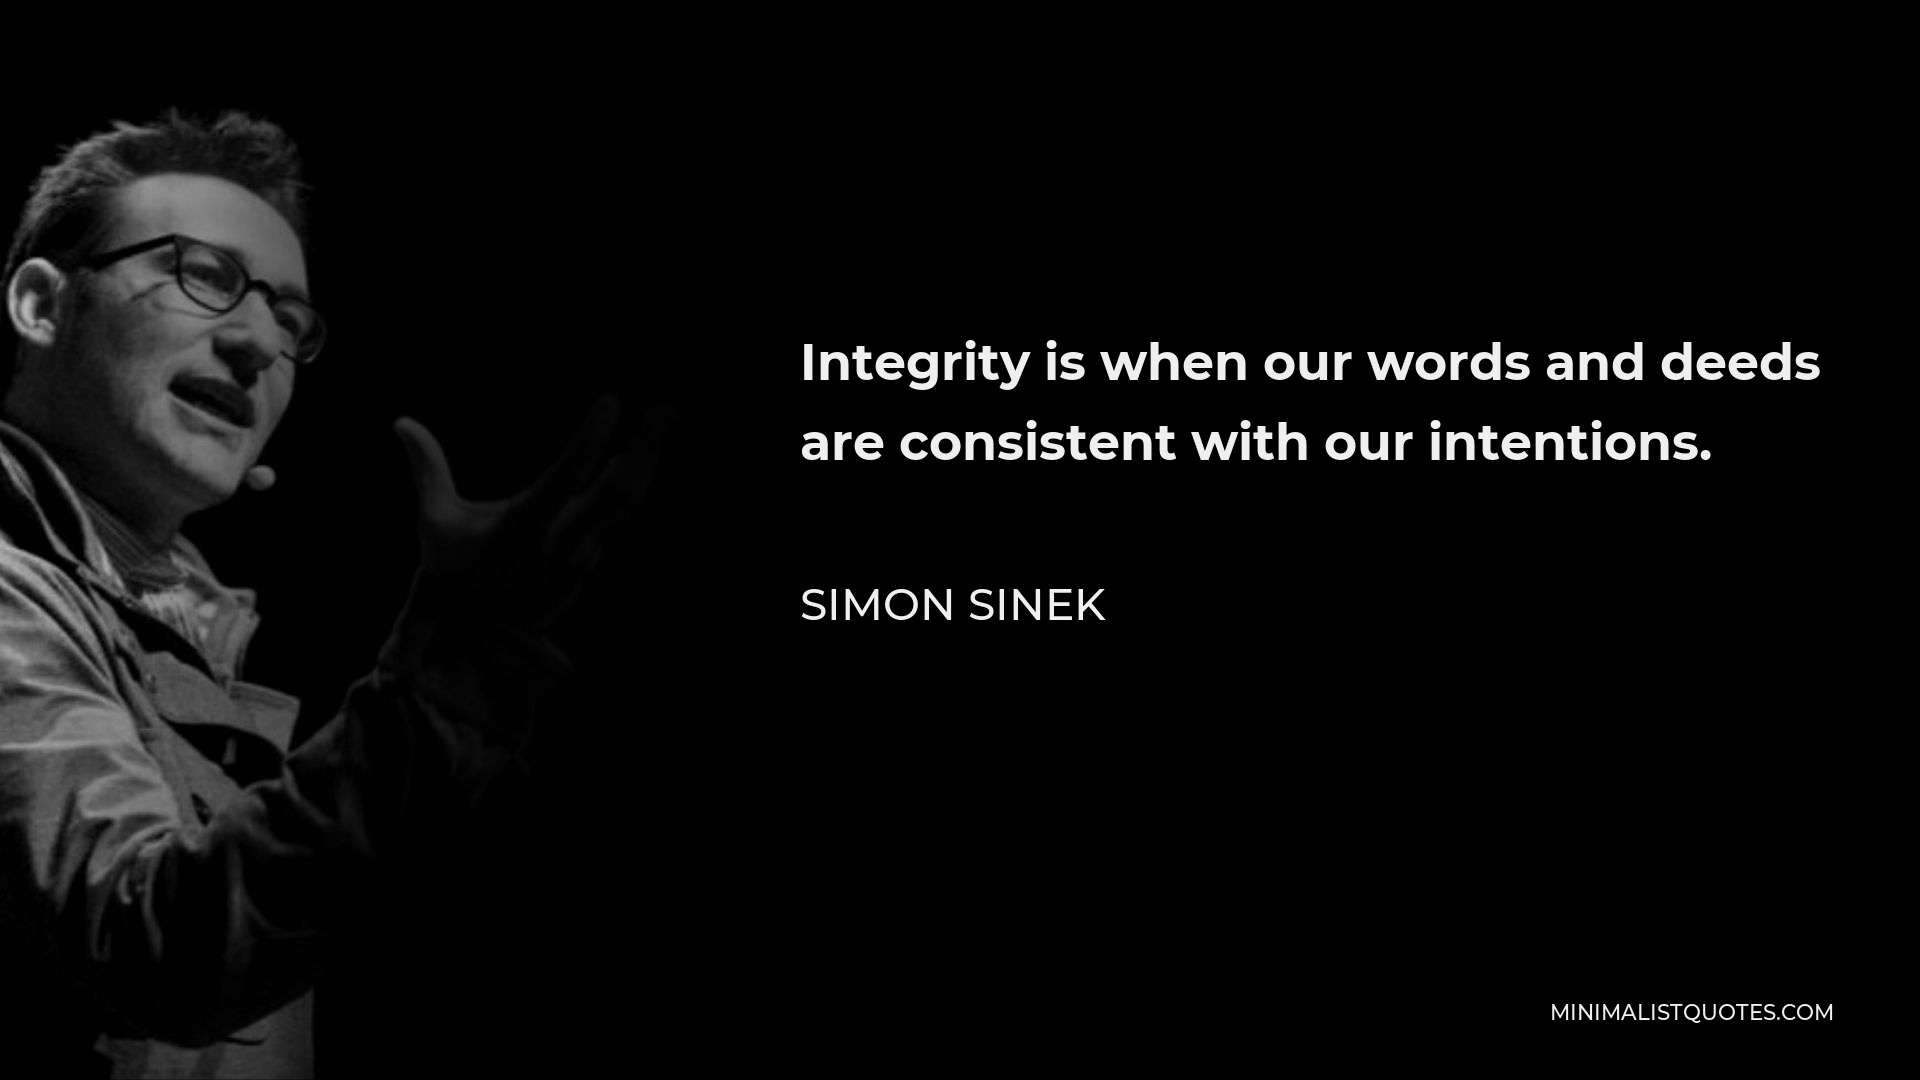 Simon Sinek Quote - Integrity is when our words and deeds are consistent with our intentions.